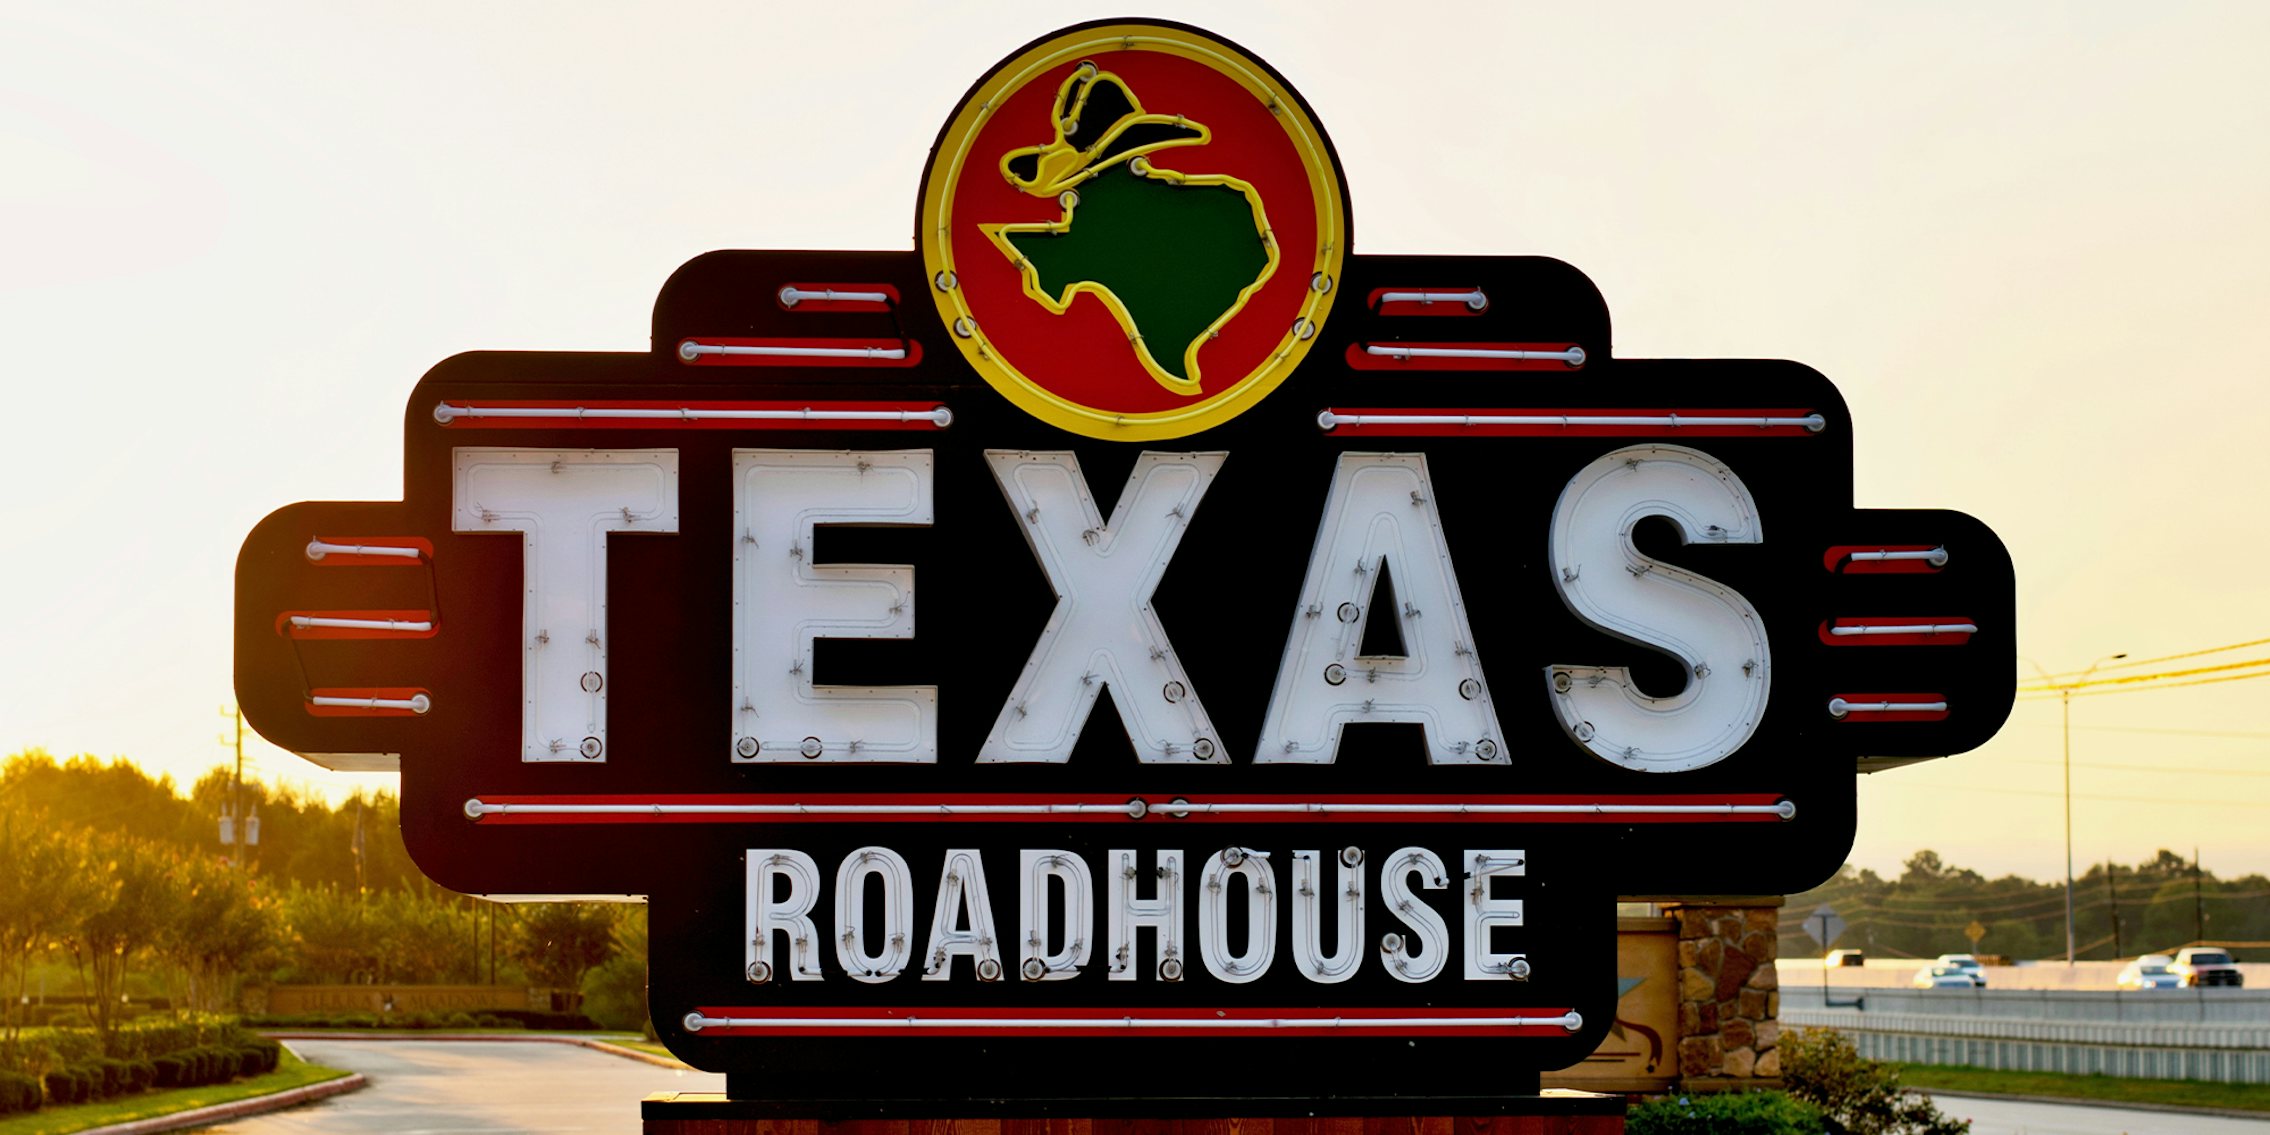 Texas Roadhouse restaurant sign on a freeway in Humble, Texas.